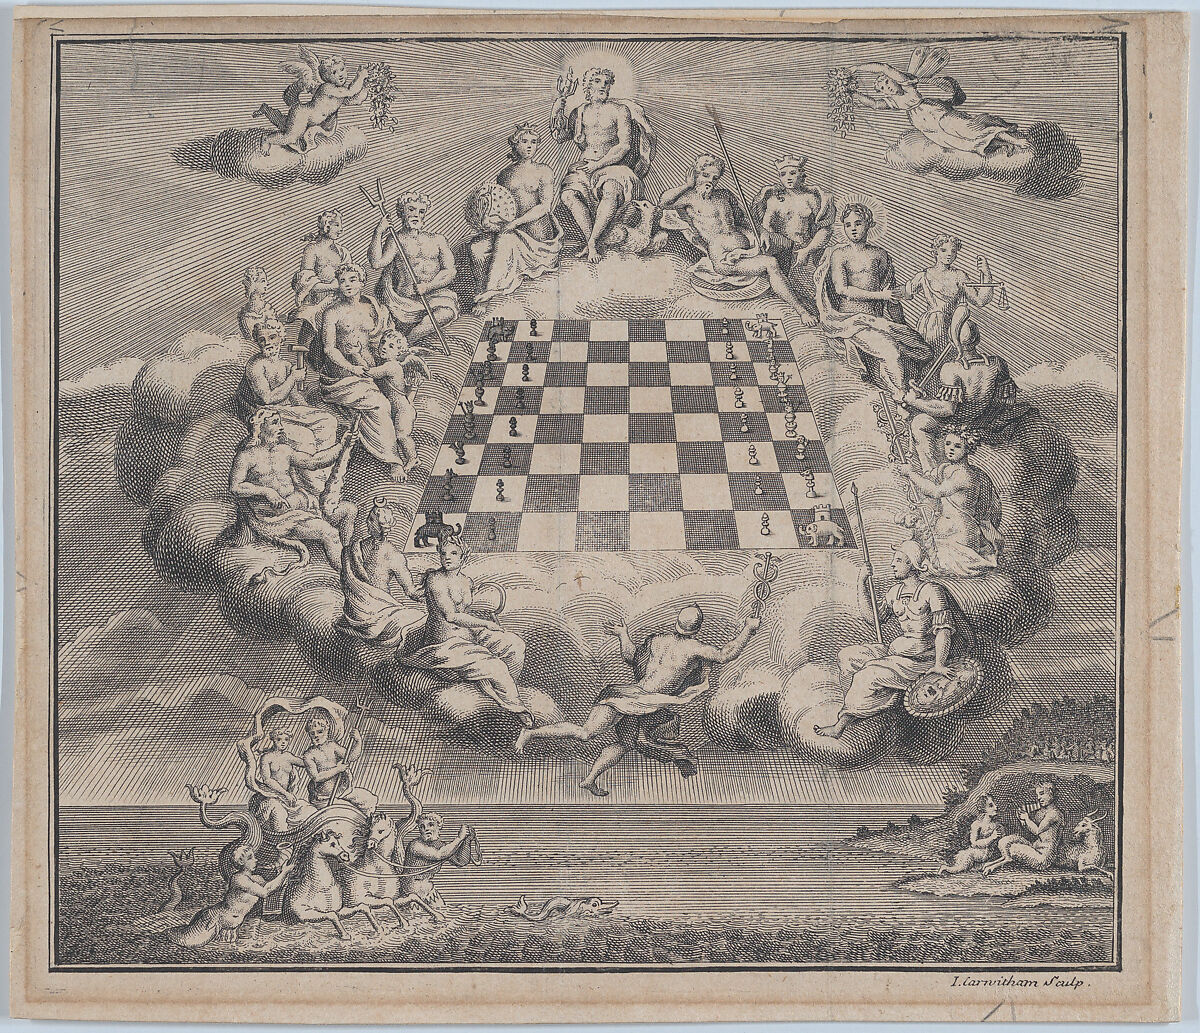 Heavenly Scene with the Gods of Olympus Surrounding a Chess Board, Poseidon and Pan Below, John Carwitham (British, active ca. 1723–60), Engraving 